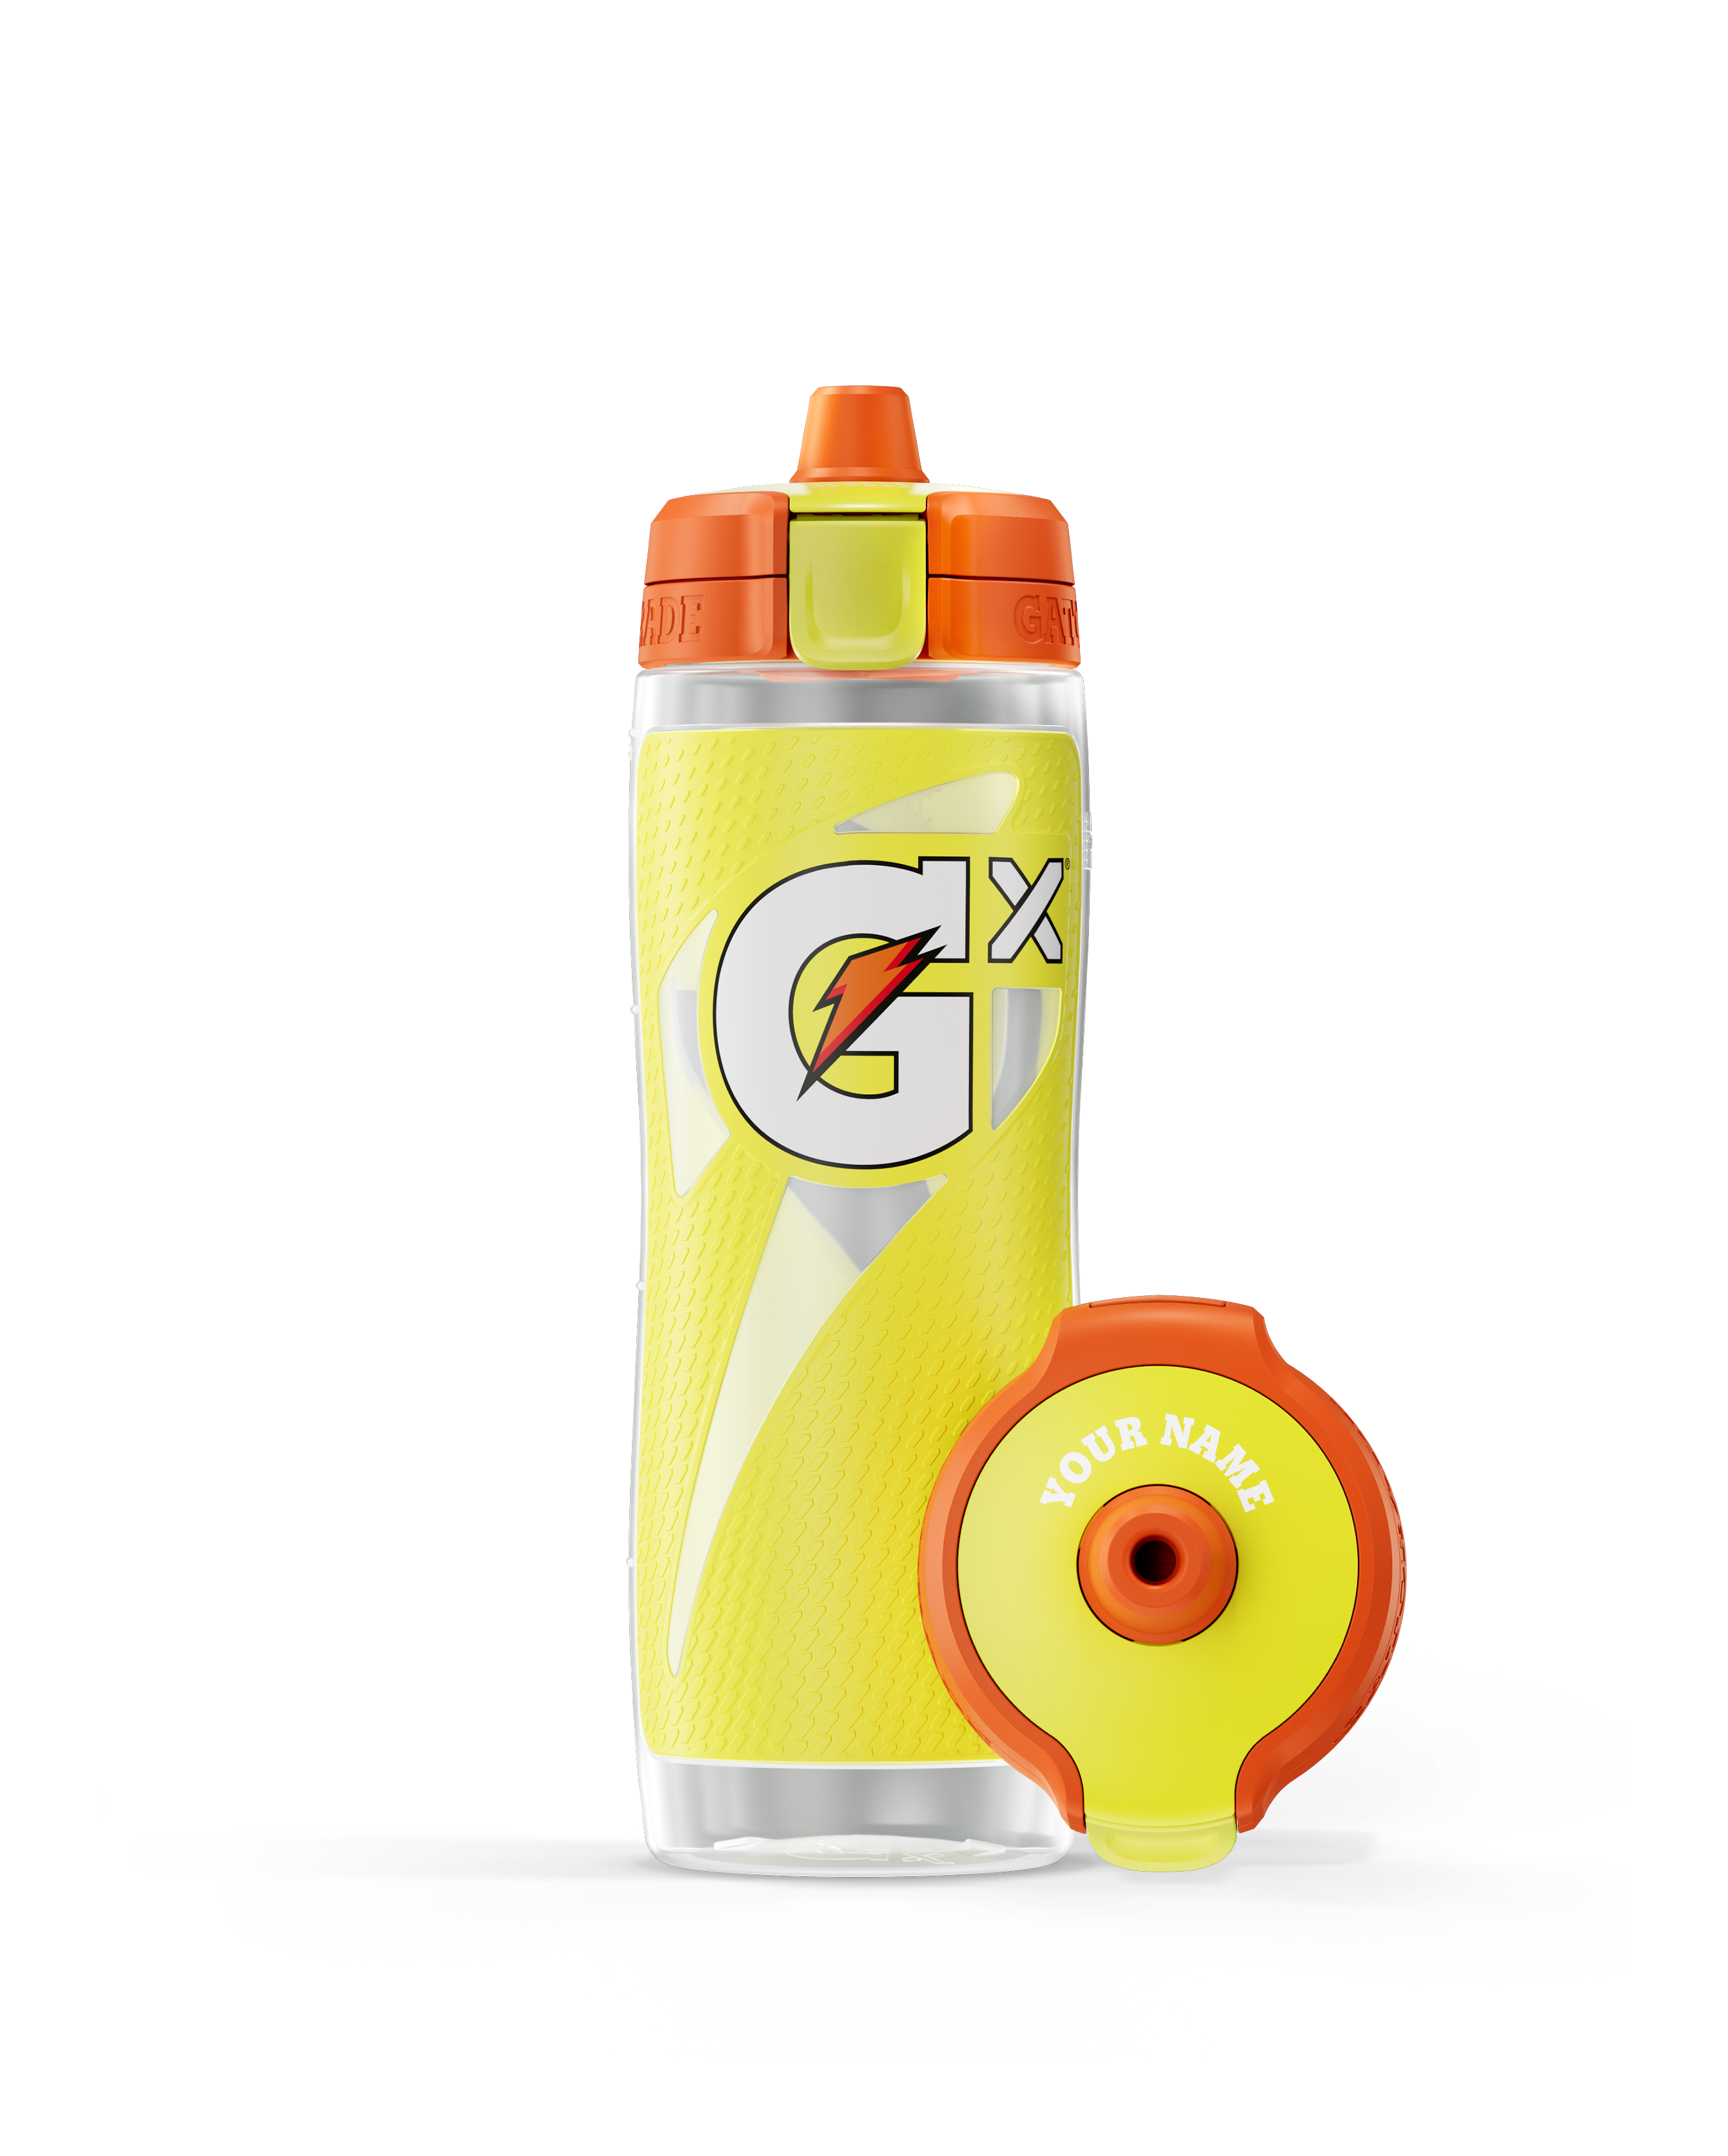 Gx exclusive bottle in neon yellow